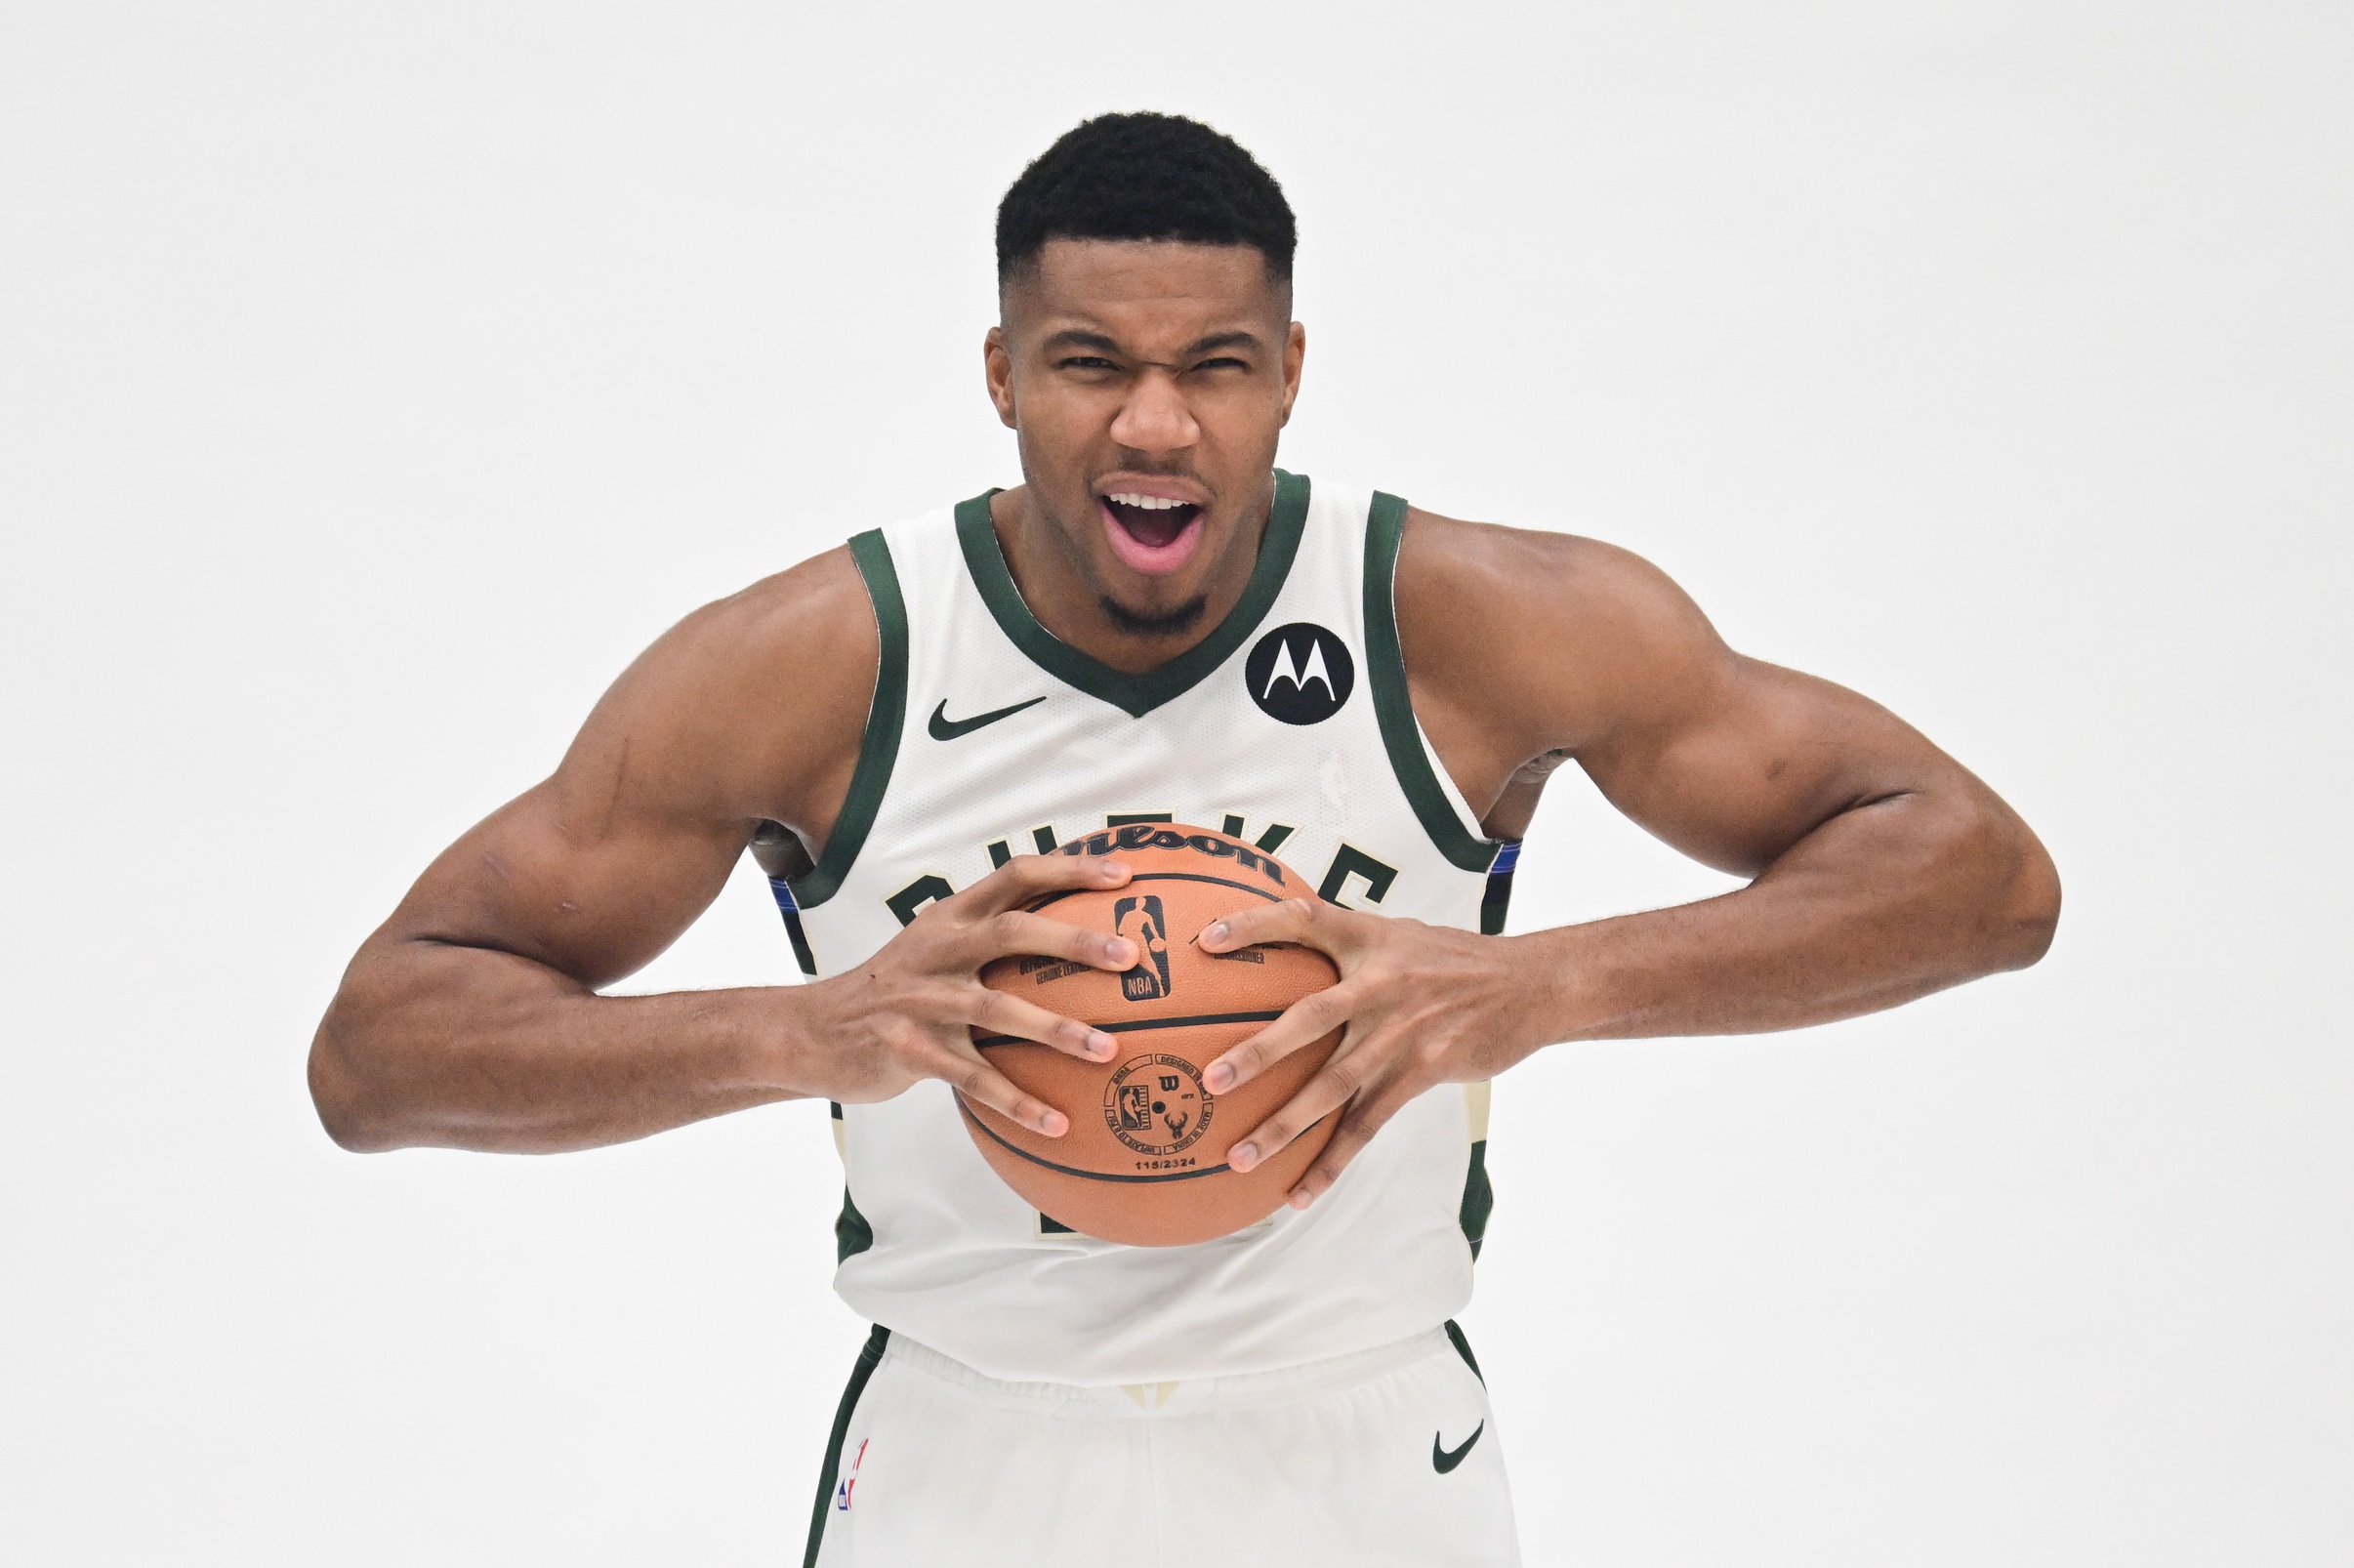 Oct 2, 2023; Milwaukee, WI, USA; Milwaukee Bucks forward Giannis Antetokounmpo (34) poses for a picture during media day in Milwaukee. Mandatory Credit: Benny Sieu-USA TODAY Sports. The Bucks are the favorite in the Central Division as well as one of the favorites in the Eastern Conference